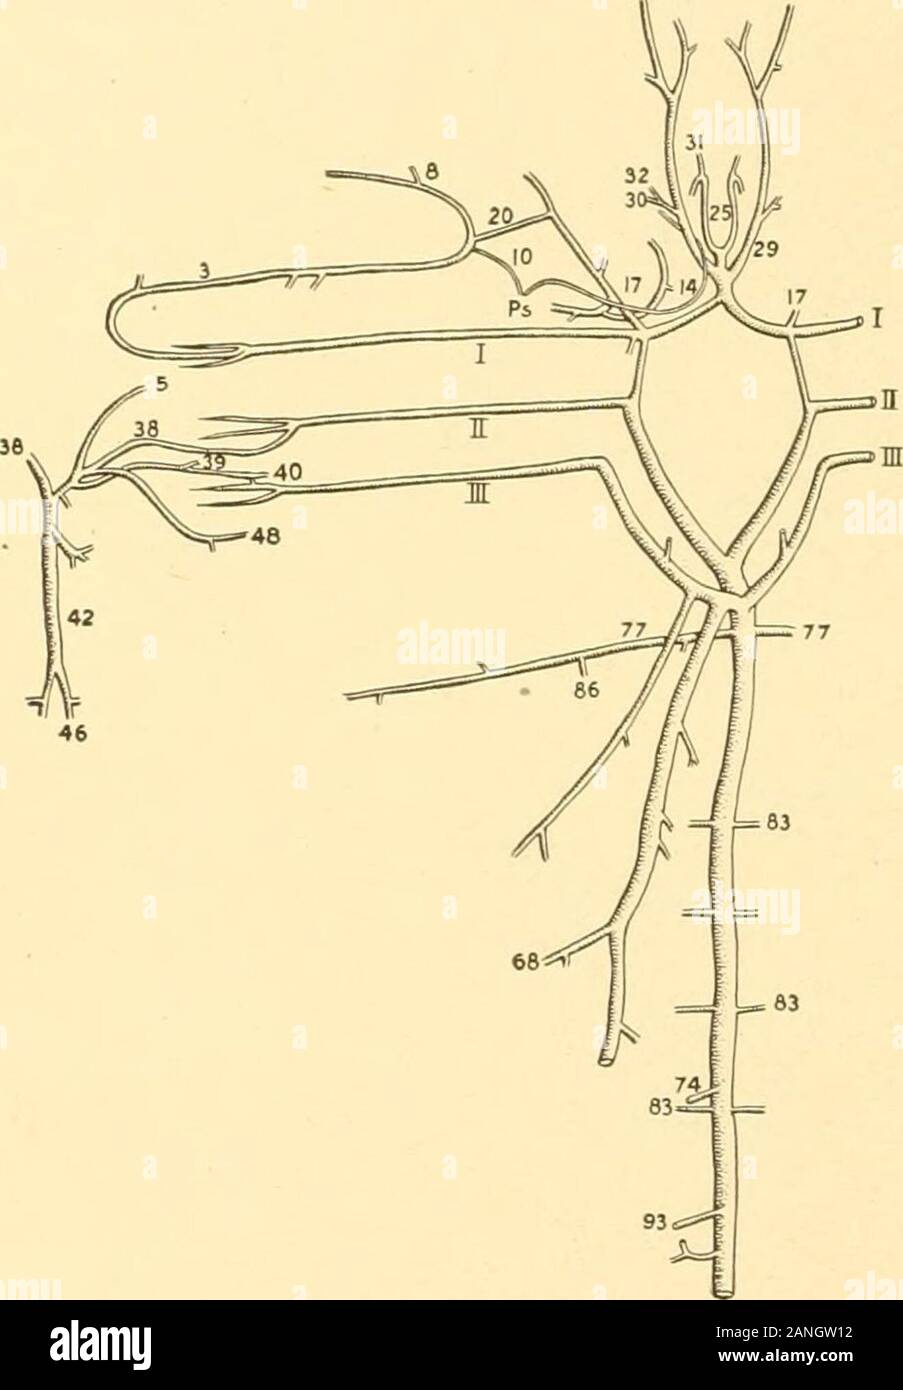 Bulletin of the Bureau of Fisheries . 10.—Cranial portion of the arterial system ia the toad-fish (Opsanus 7 V 7 7 id 1 £ l  fa«). Ventral view, natural size. On the right side the ventral ends ,fs OTanC/ieS (tig. 1. pi. 1). of the efferent branchial arteries and their branches are reflected so (^ Two small branches are civetl as to bring thein into one plane, j. .. ,, , ,.j on from the external carotid near its origin. The larger {30) runs laterad and divides into two branches which supplythe external and superior recti muscles of the eye. The artery that supplies thehitter muscle runs alon Stock Photo